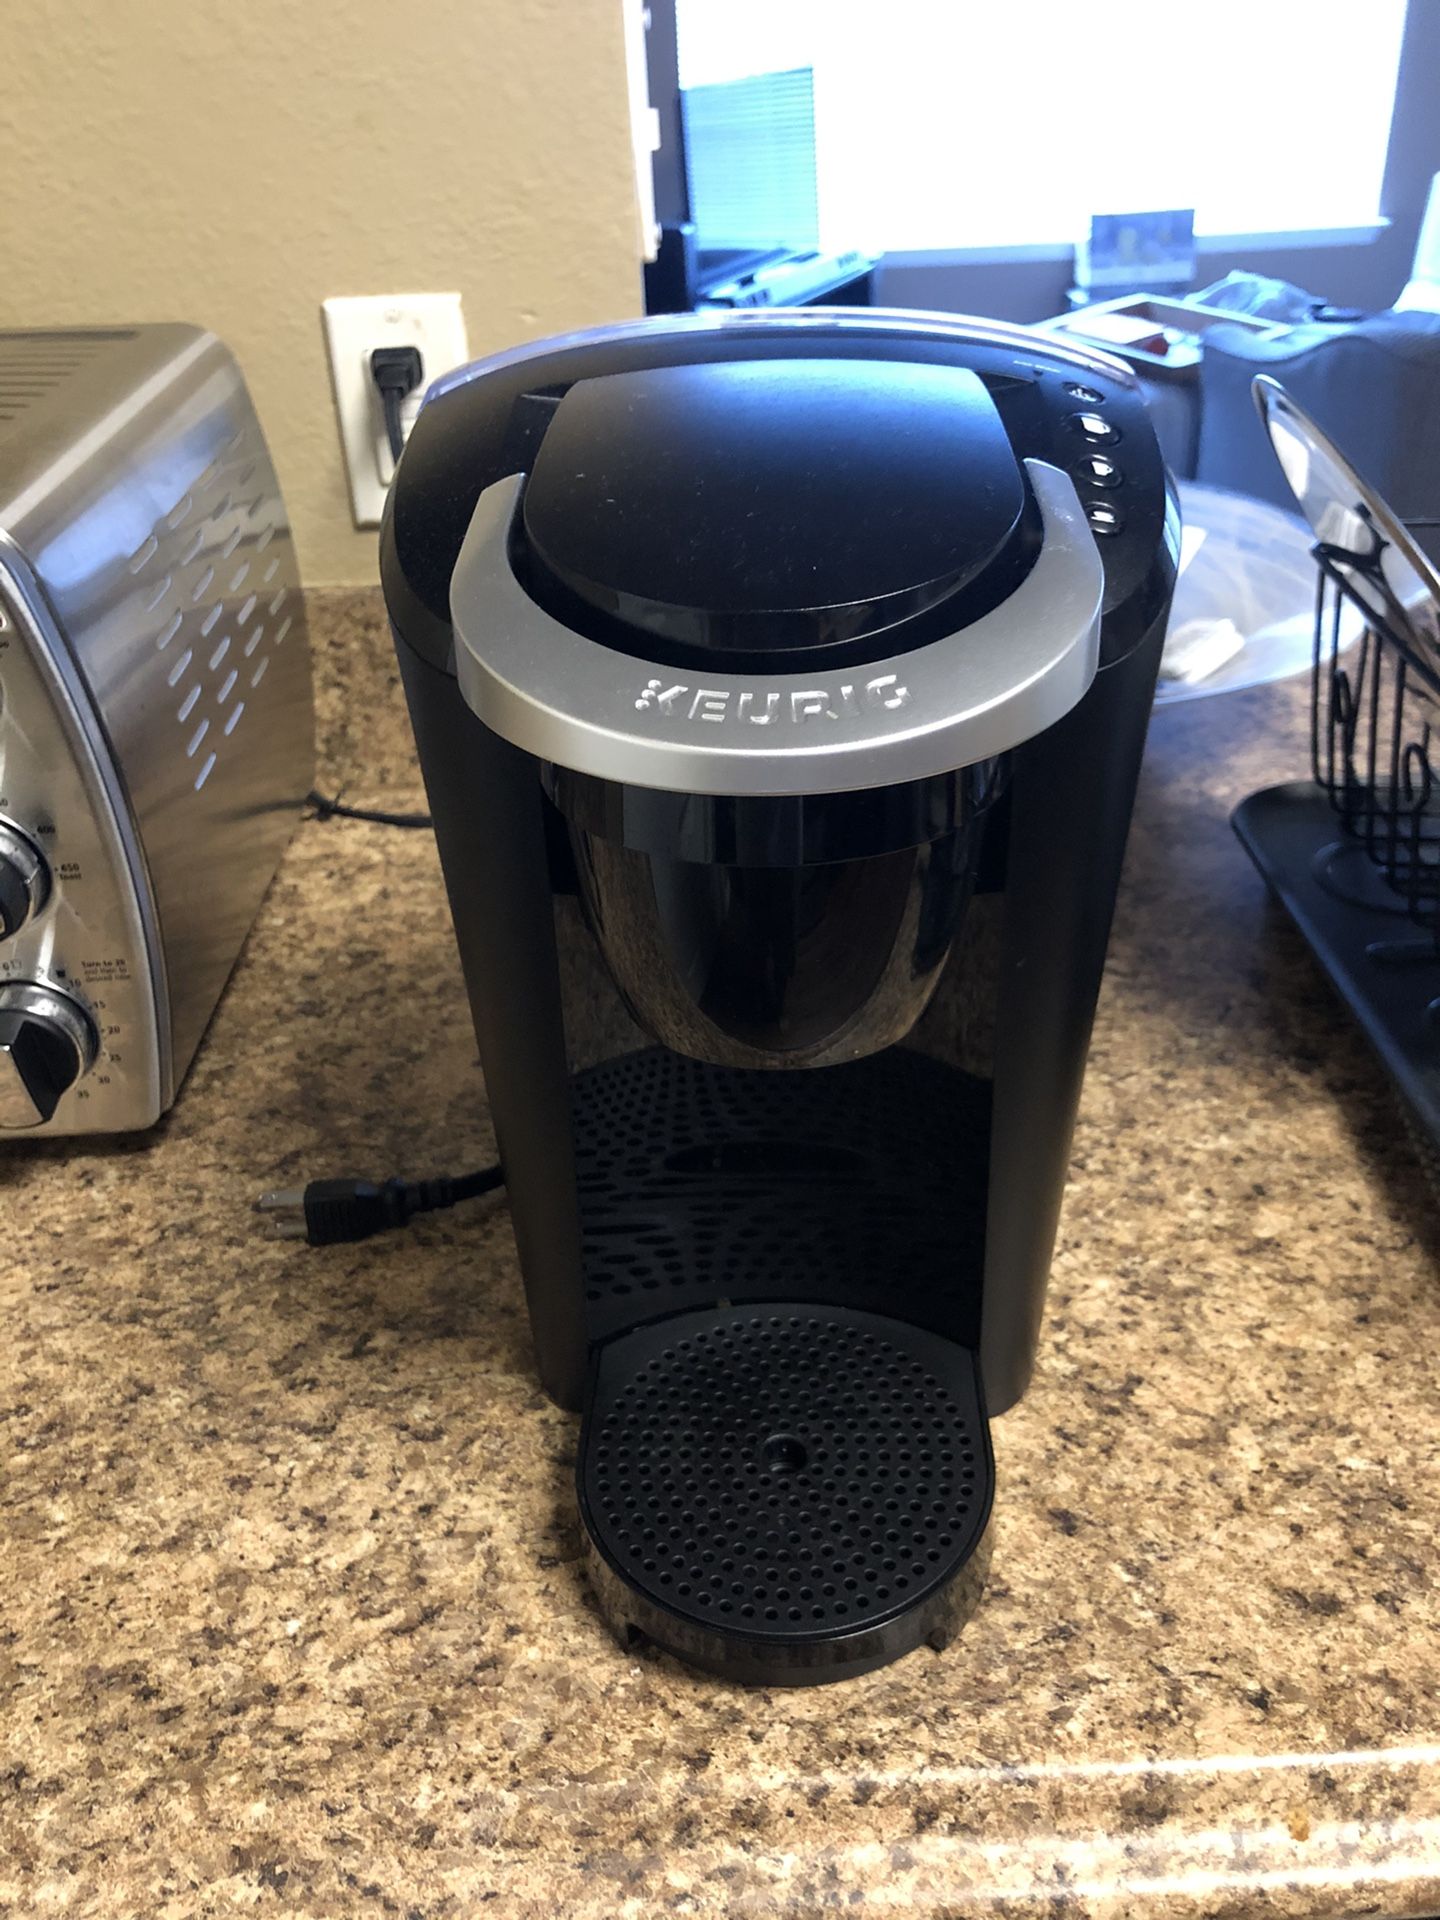 Keurig coffee maker with K-Pod stand